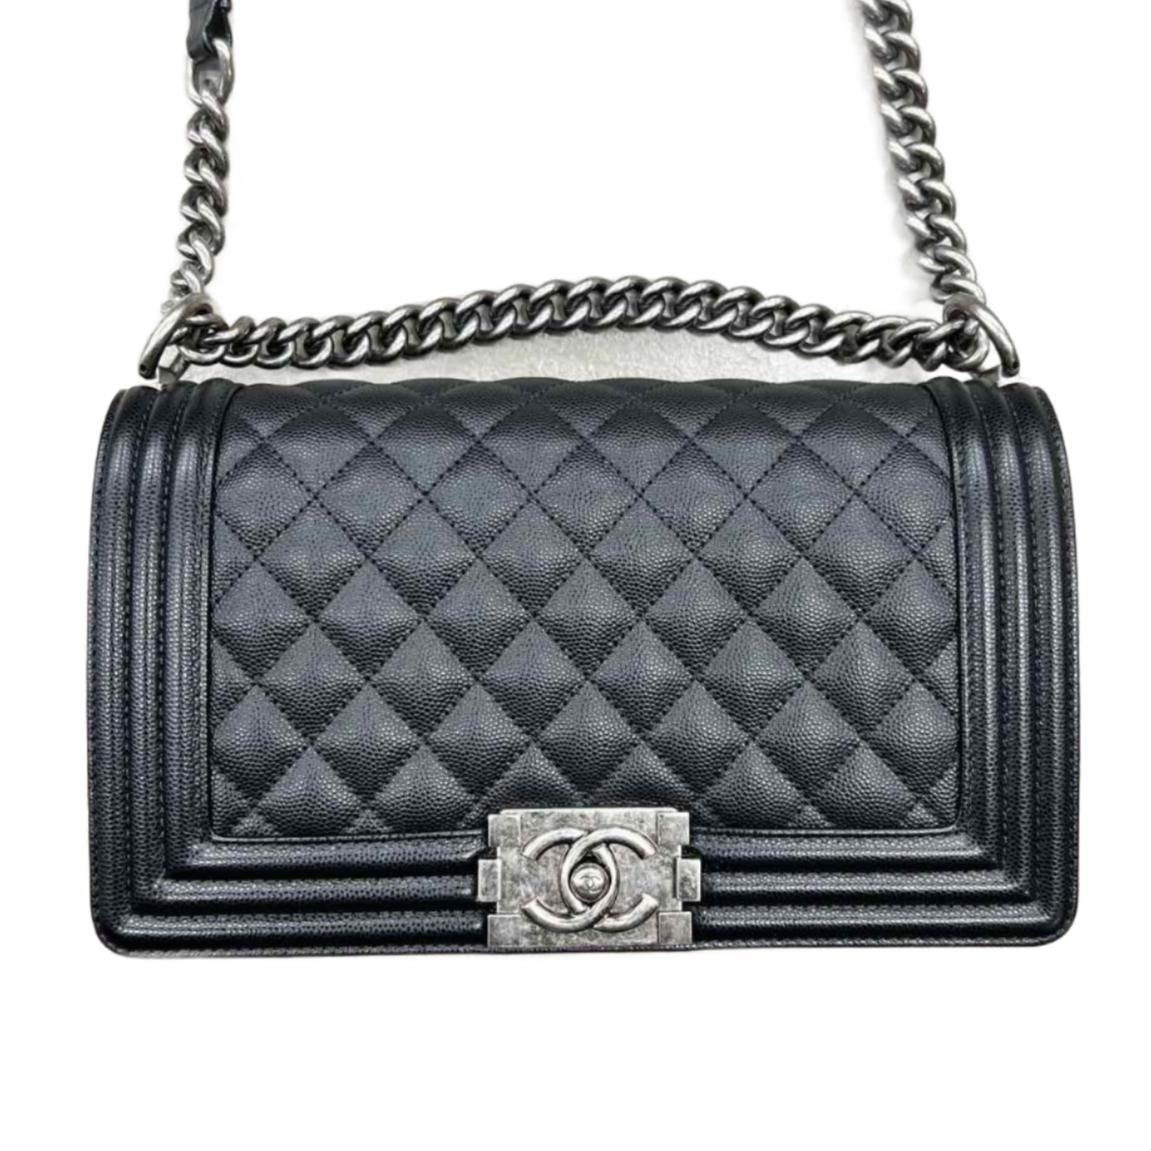 Chanel Handbag &quot;QUILTED&quot; Used Black Size OS